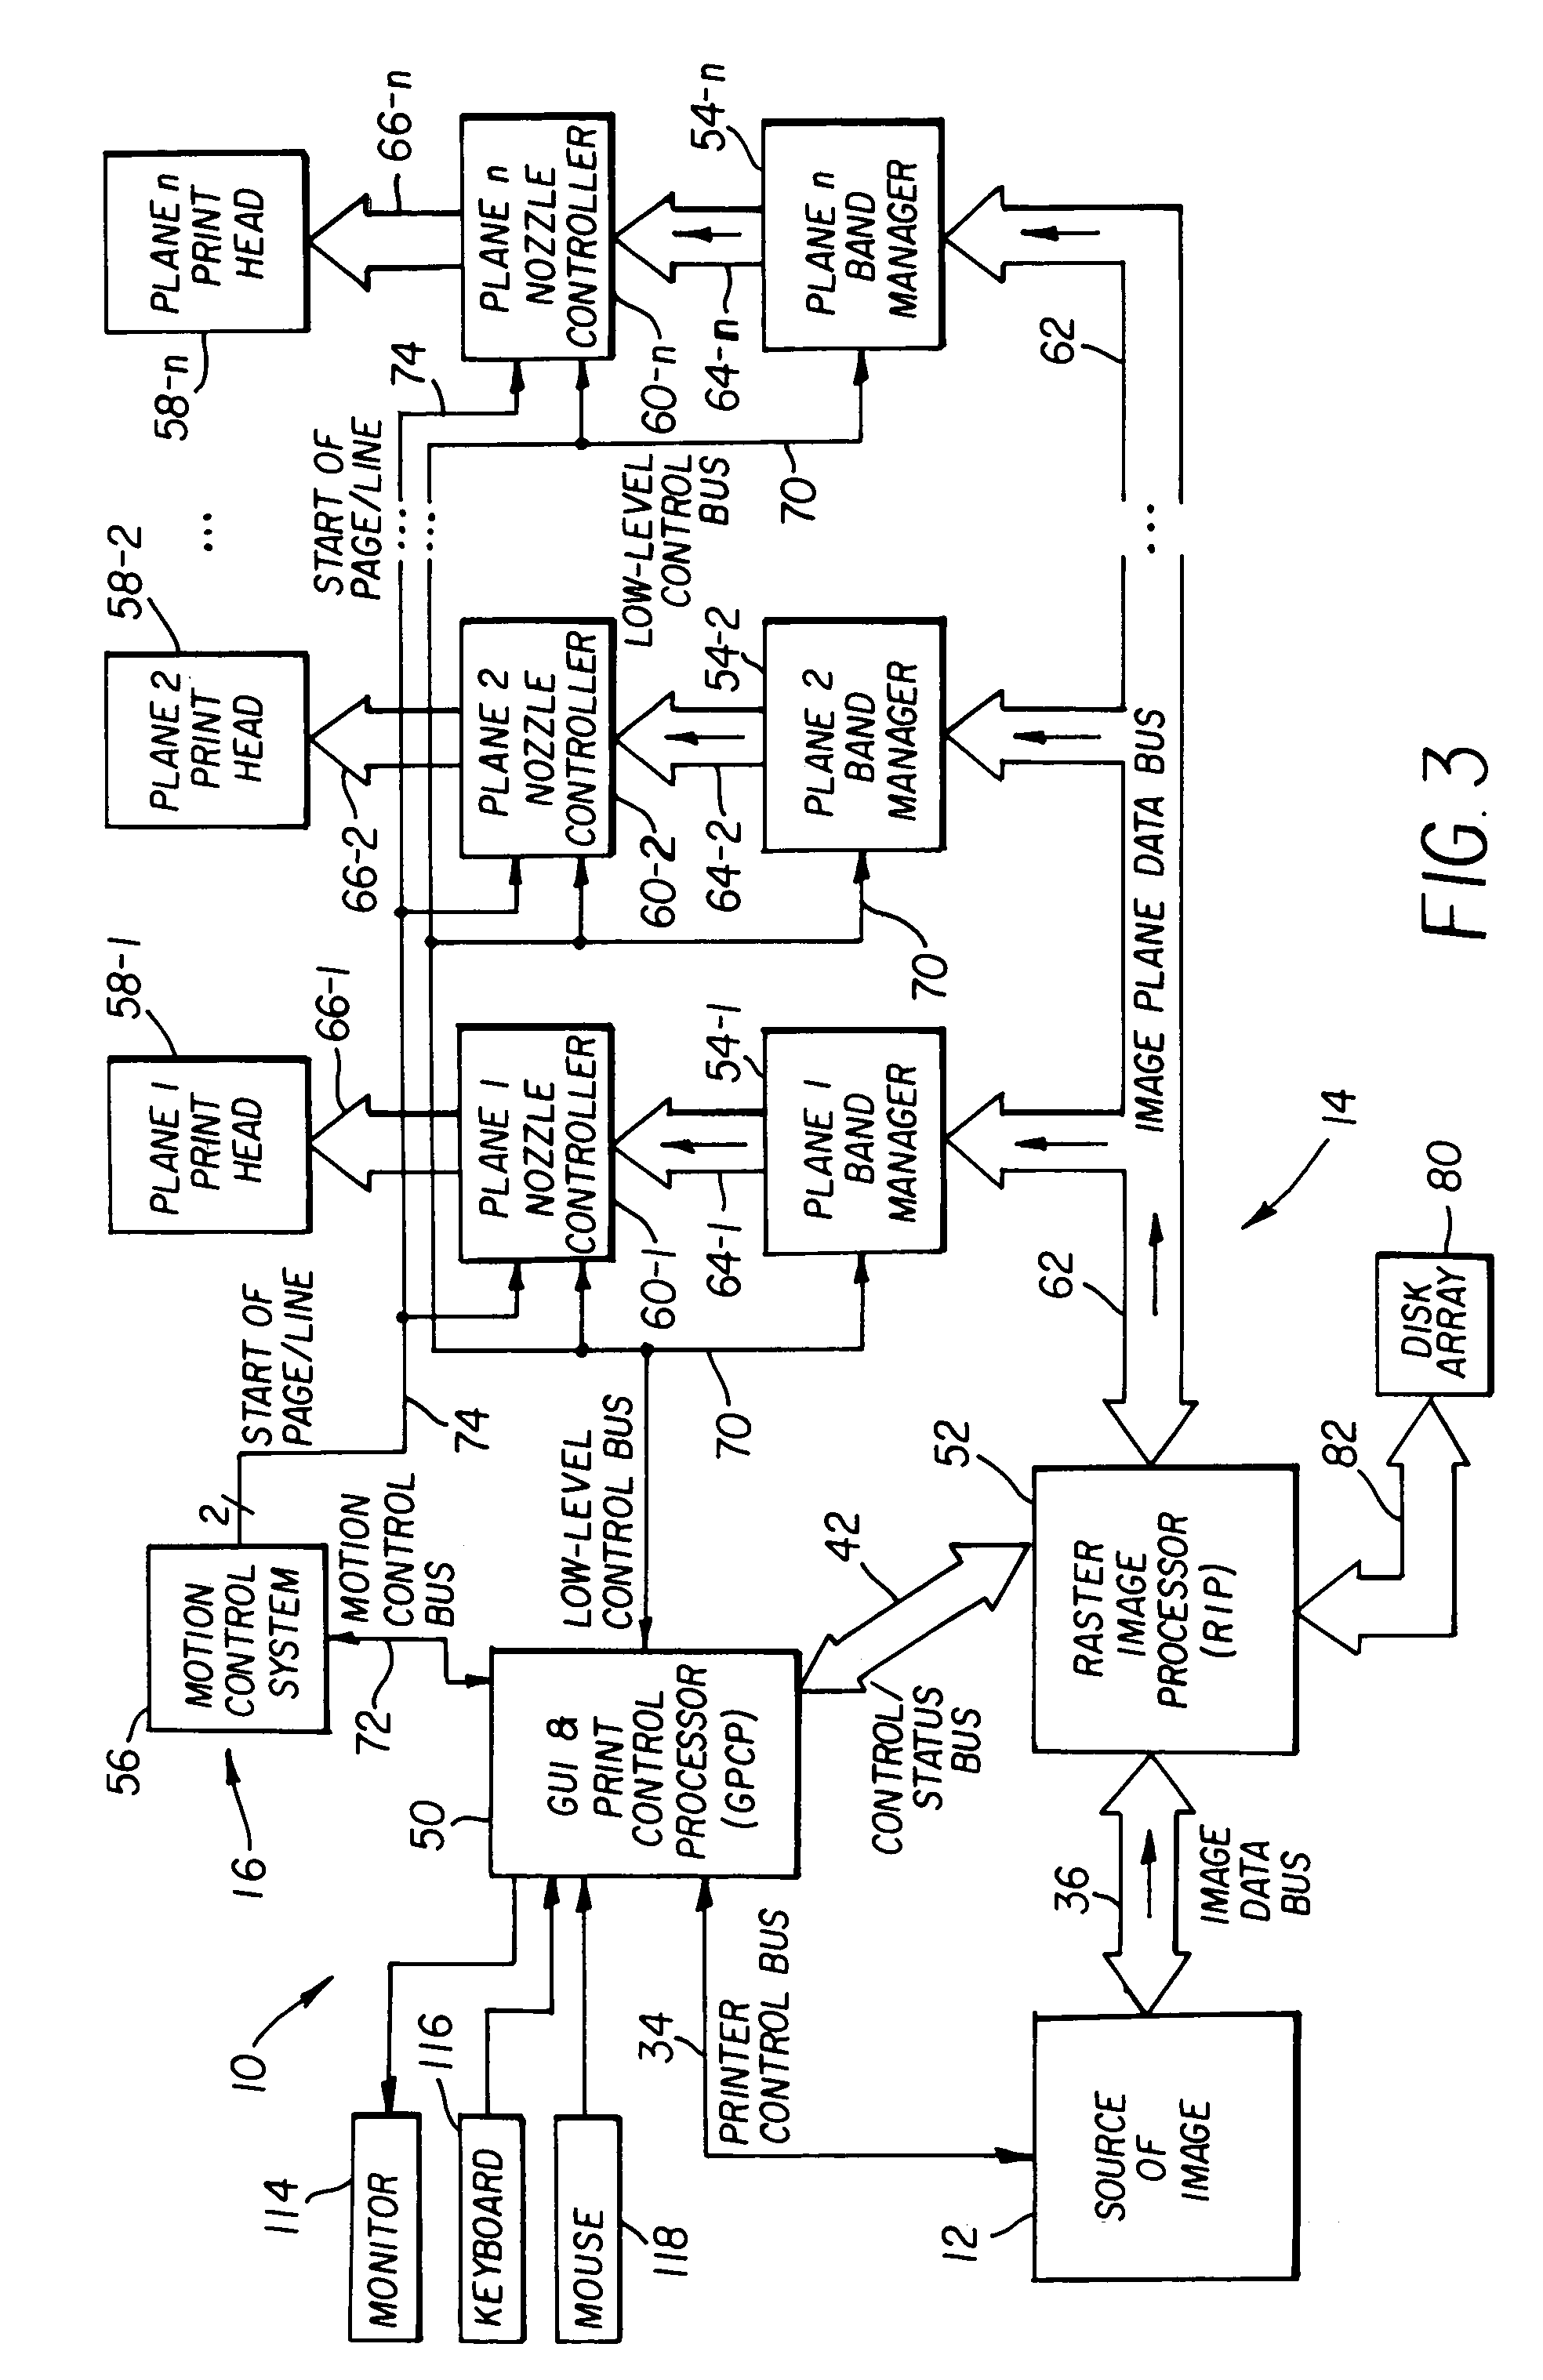 Image processor for high-speed printing applications